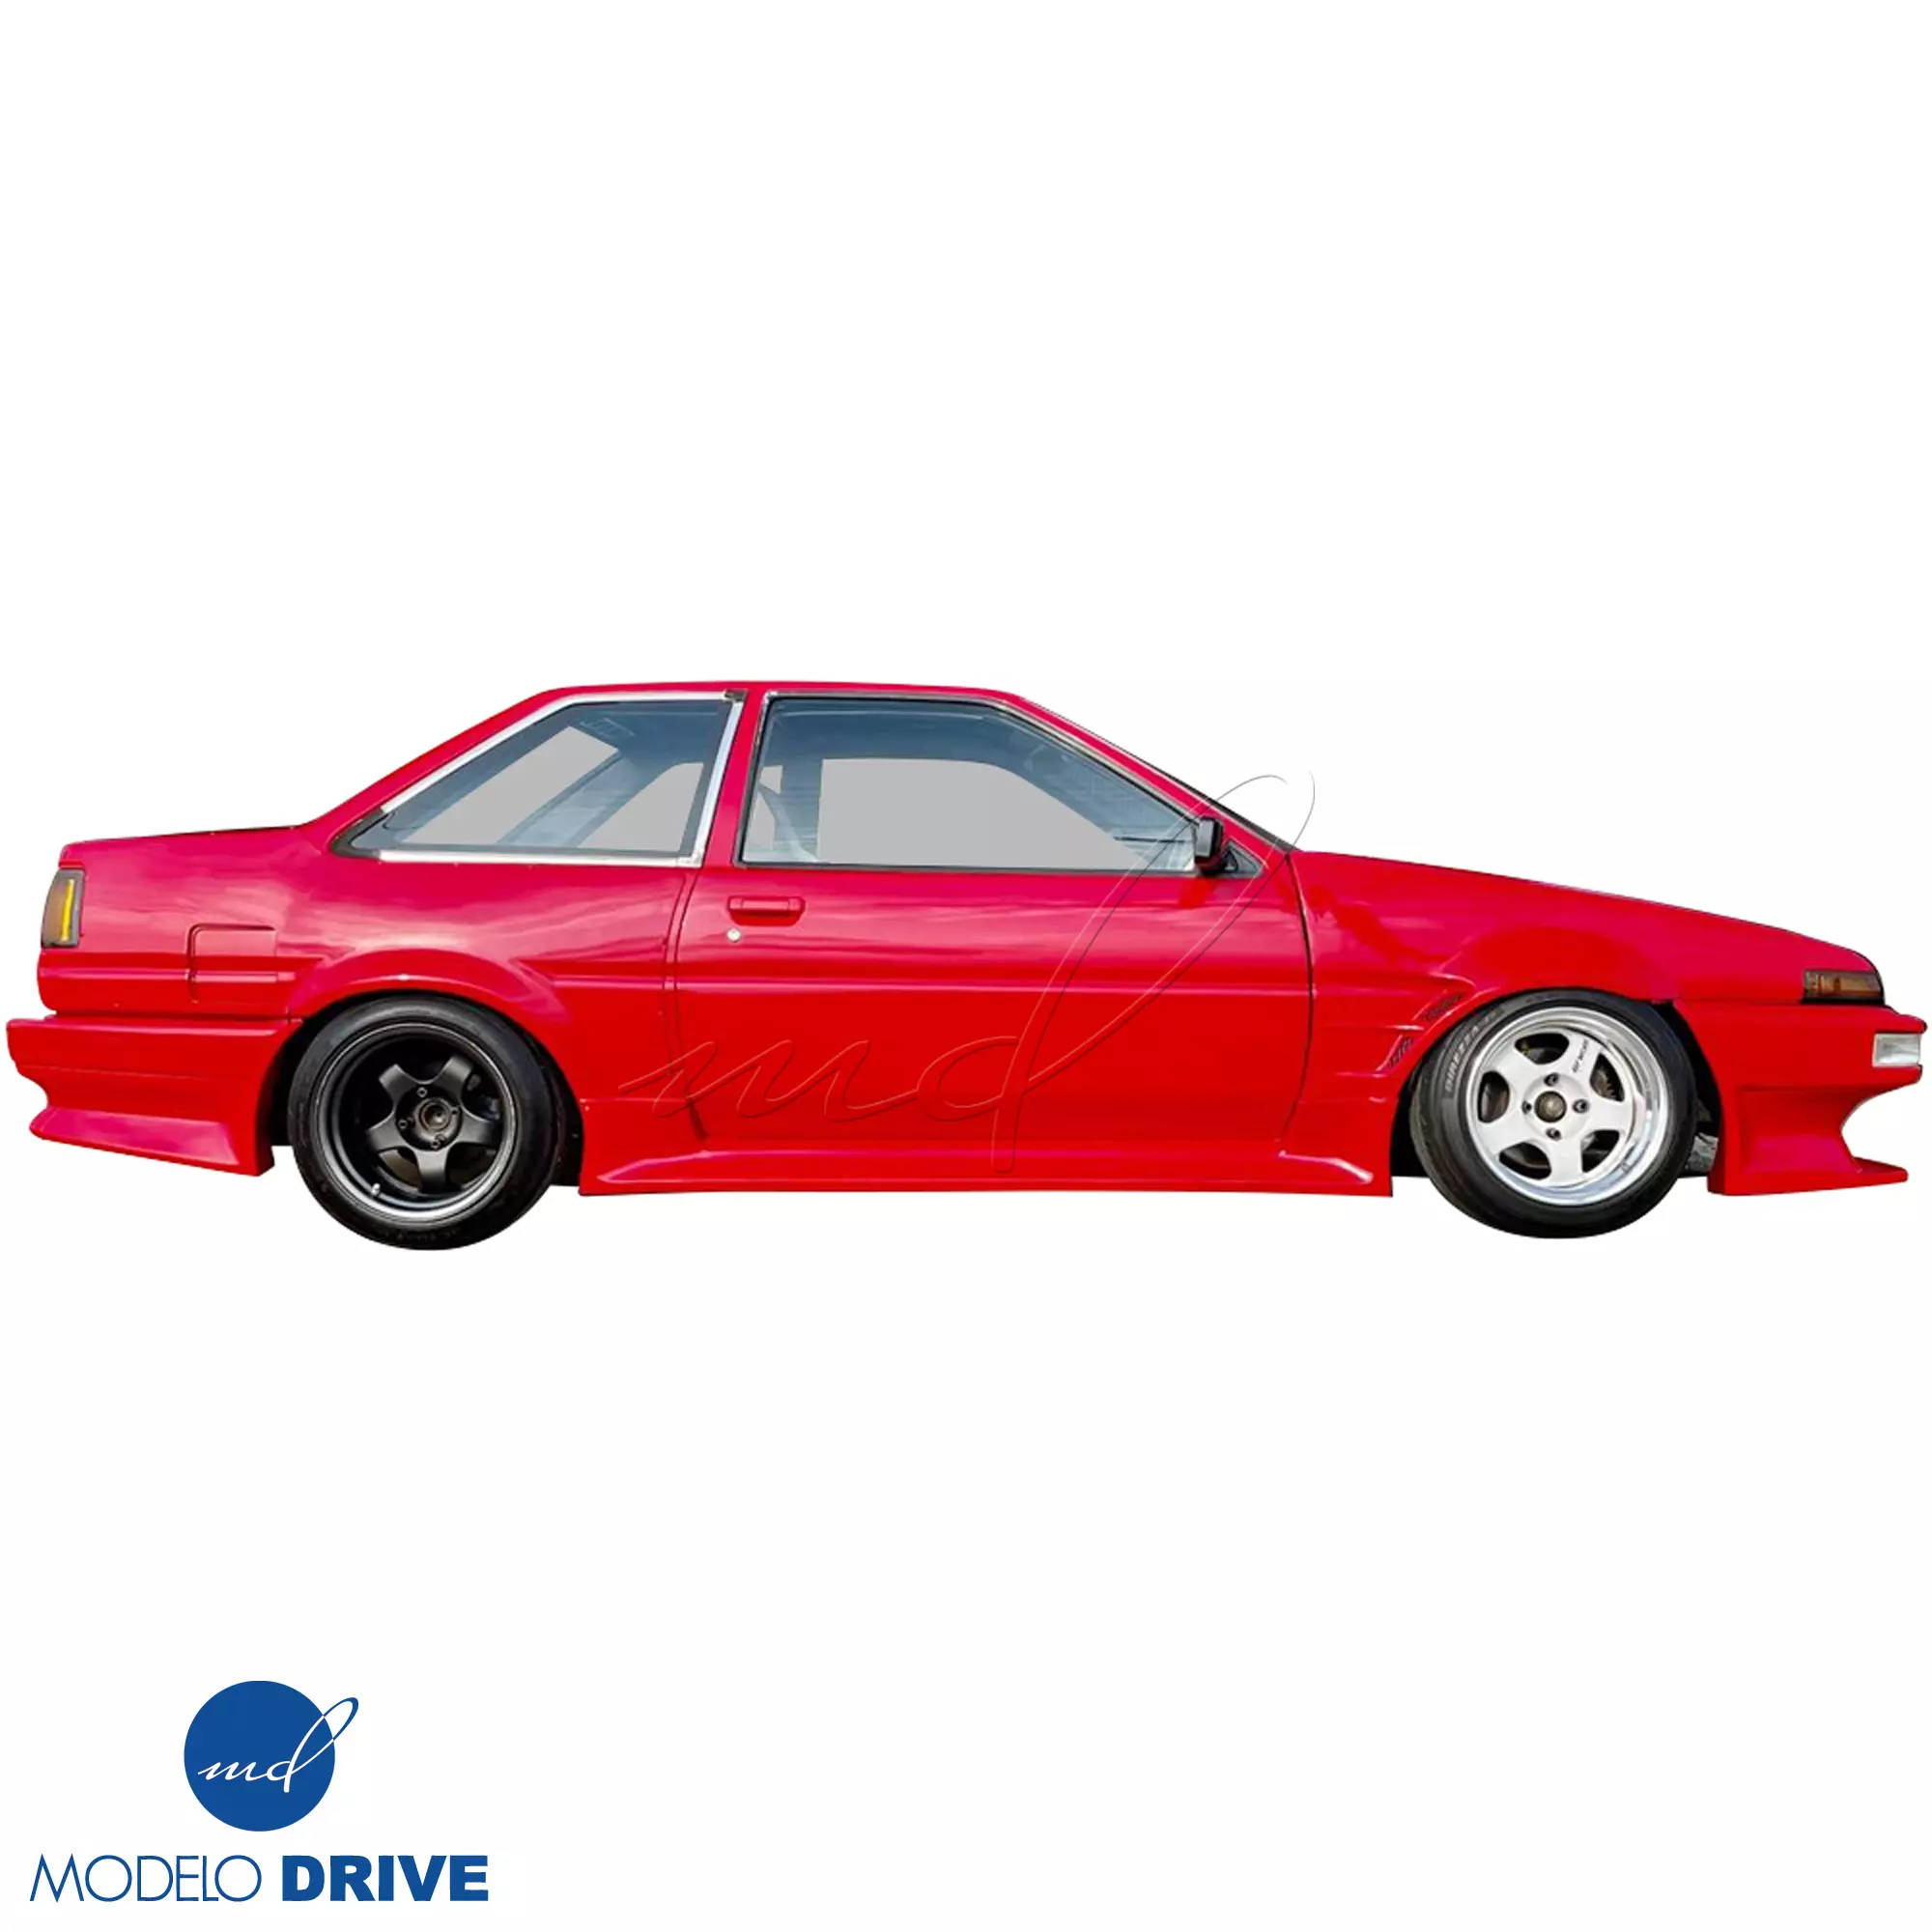 ModeloDrive FRP DMA D1 Wide Body 30mm Fenders Set > Toyota Corolla AE86 1984-1987 > 2dr Coupe - Image 50